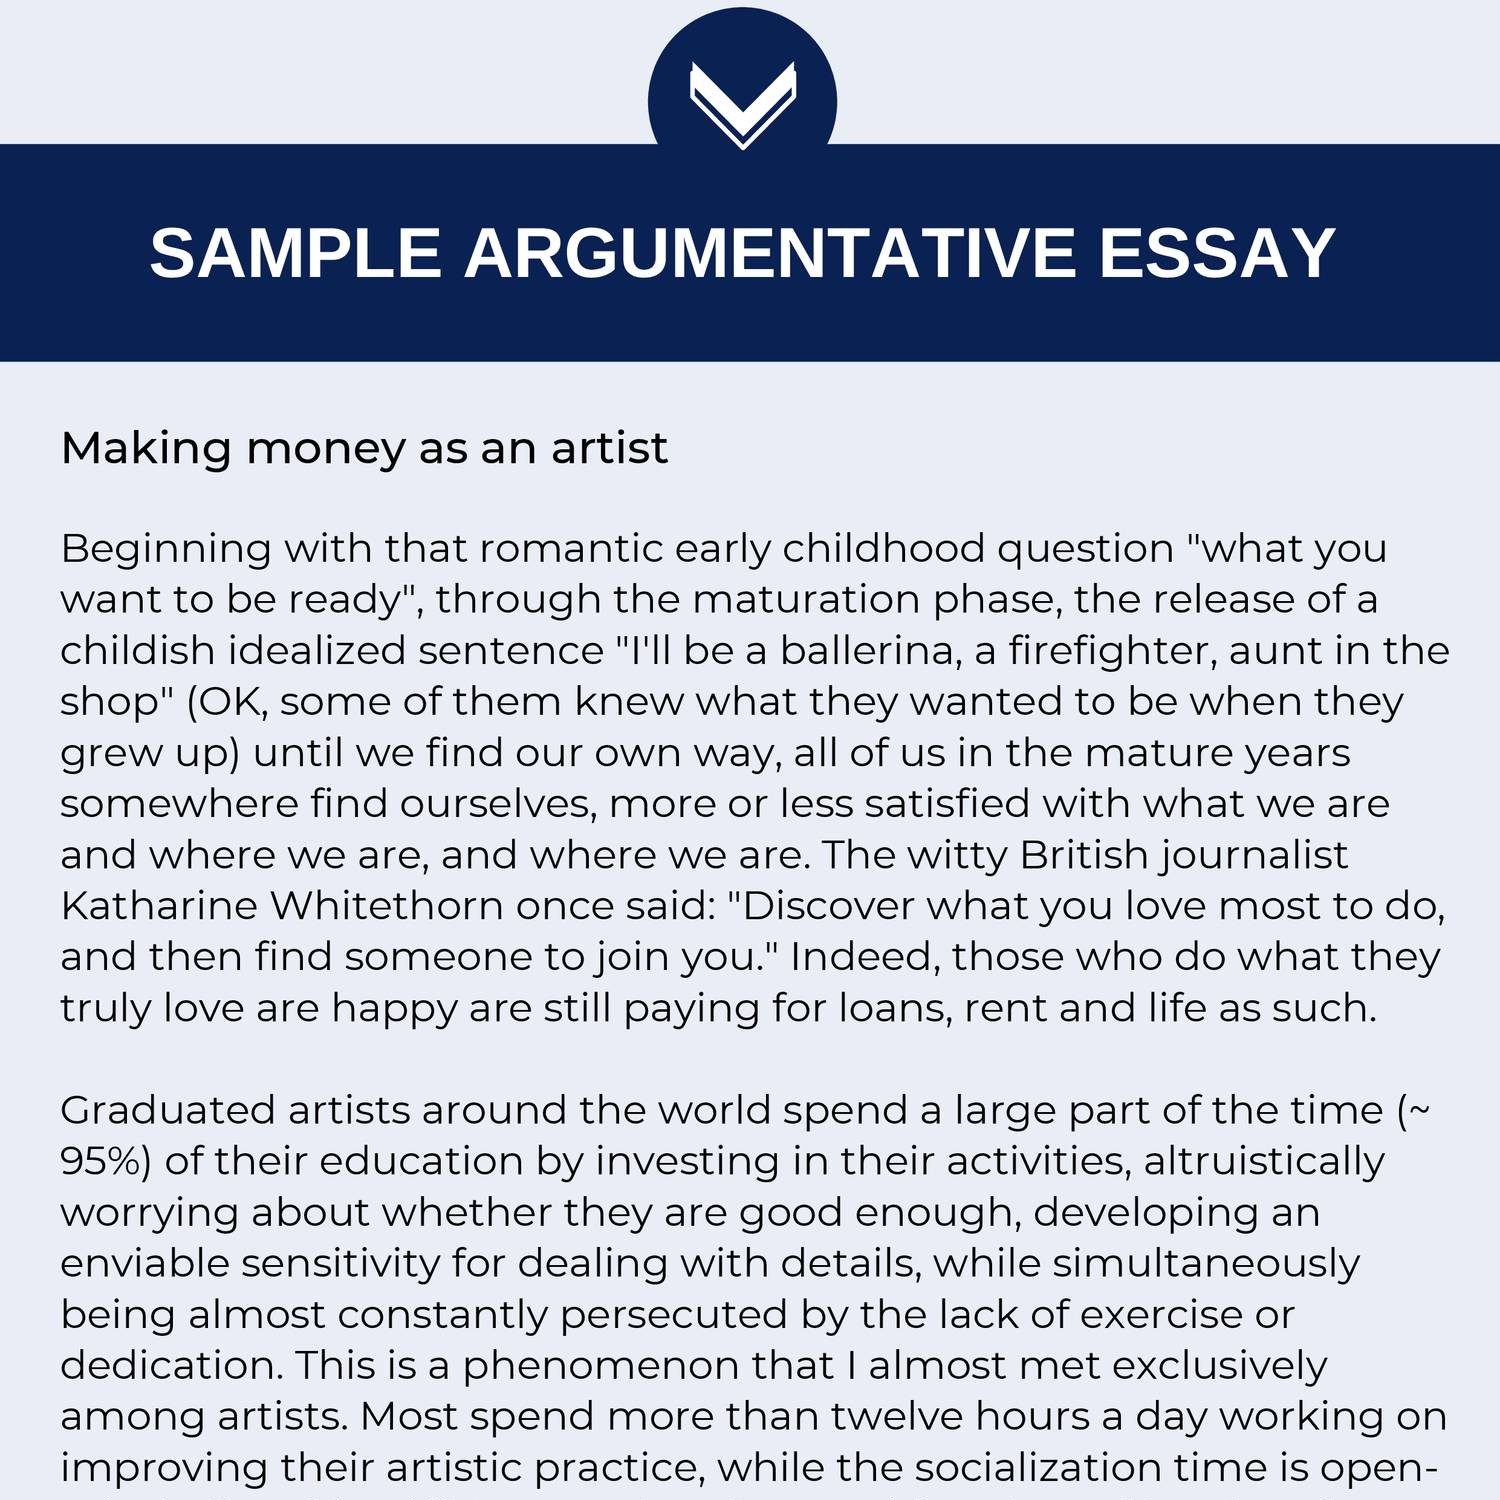 another word for an argumentative essay is